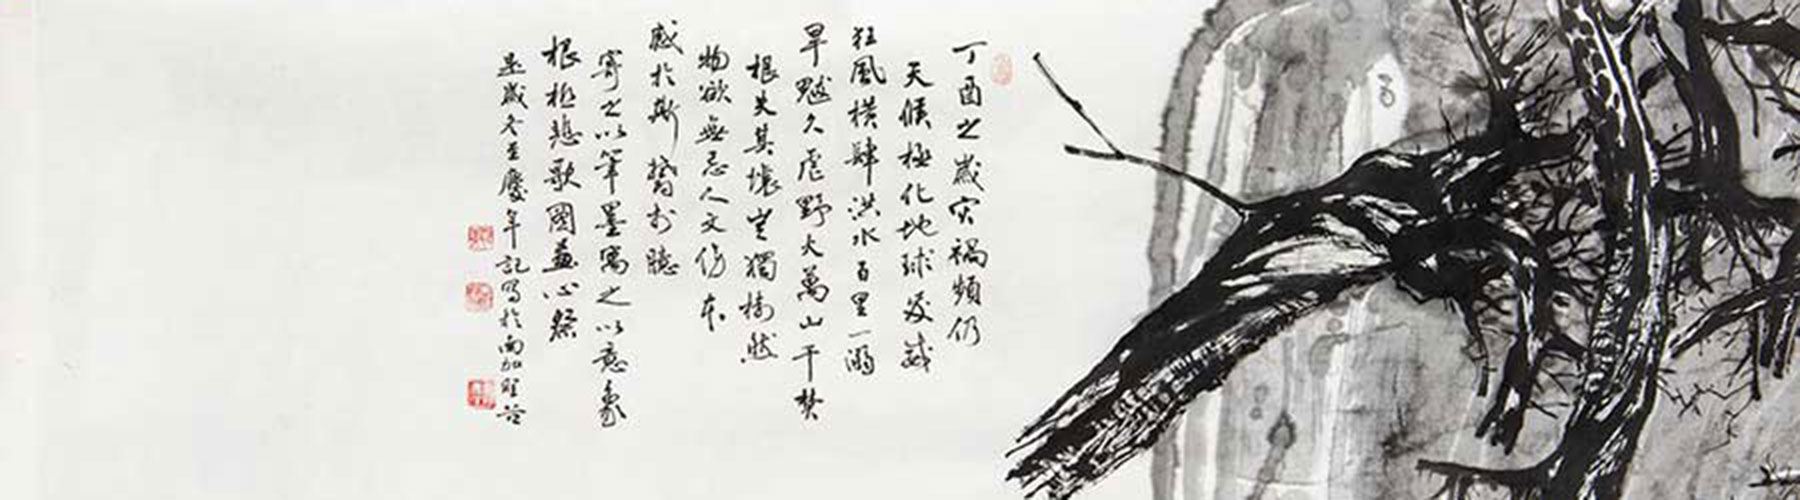 Detail of Illustrations to the Rhapsody on a Barren Tree by Tang Qingnian